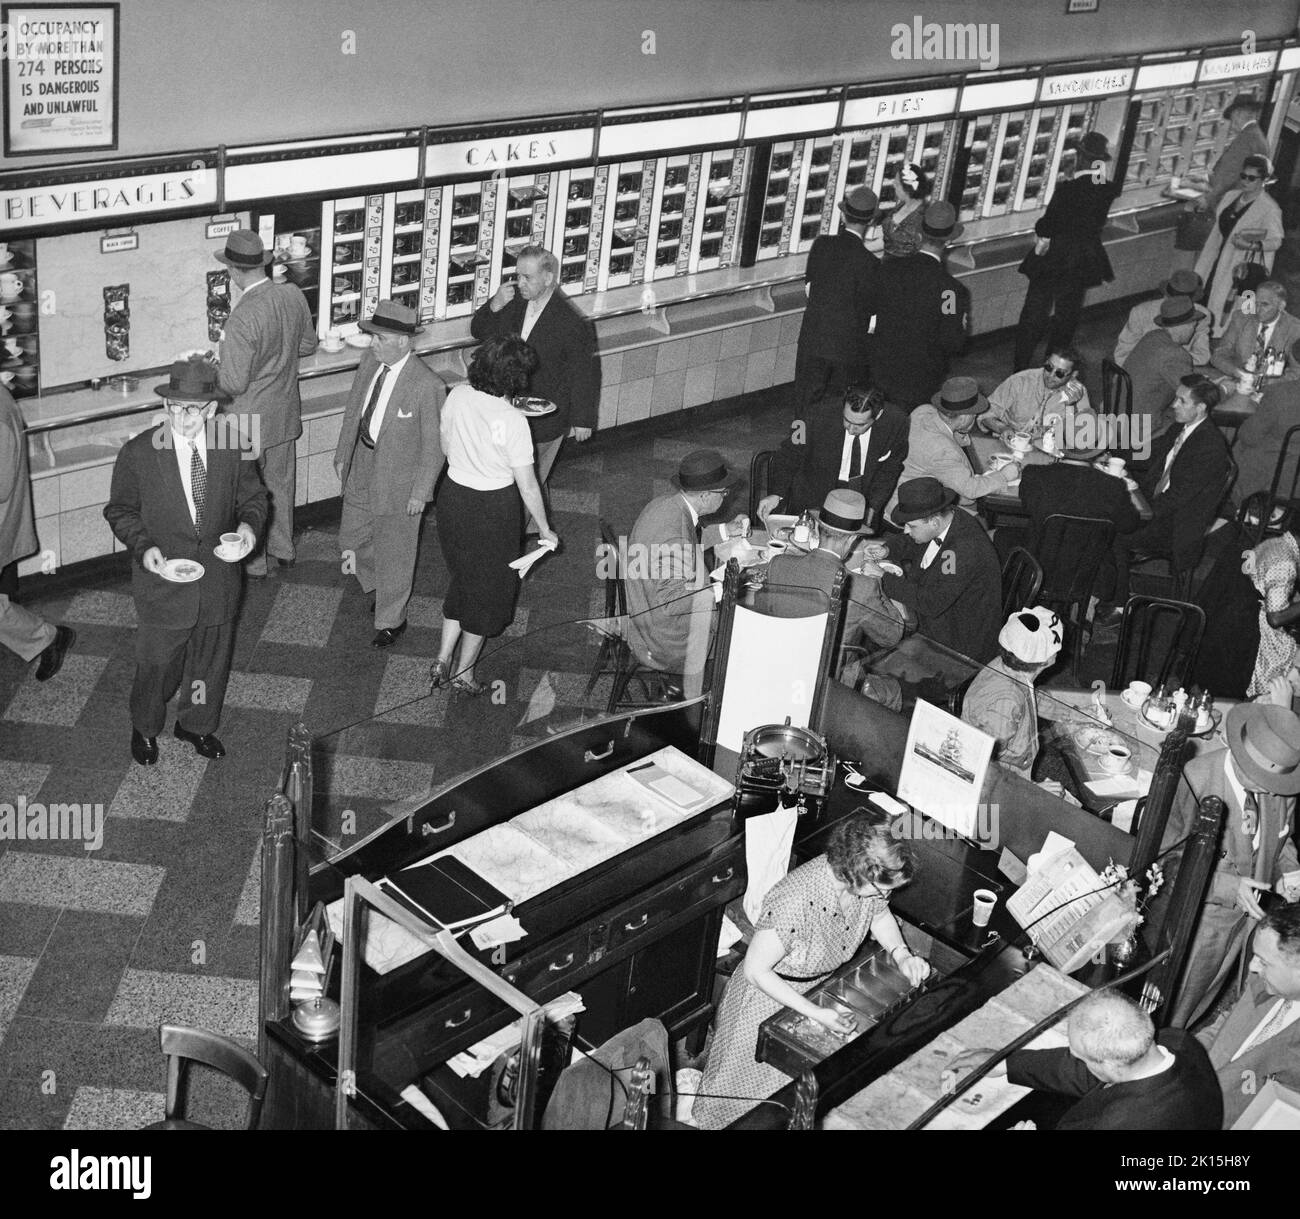 Horn & Hardart Automat Cafeteria on Avenue of the Americas at West 45th St., New York City, 1959. Horn & Hardart opened the first food service automat in New York City at Times Square on July 2, 1912. They took the concept from a successful German version. Their slogan was 'Less Work for Mother.' By the mid 20th century, there were over 50 Horn & Hardart restaurants in New York, serving 350,000 customers a day. In the 1960s, fast food franchises grew popular, and the automats began to close. Stock Photo